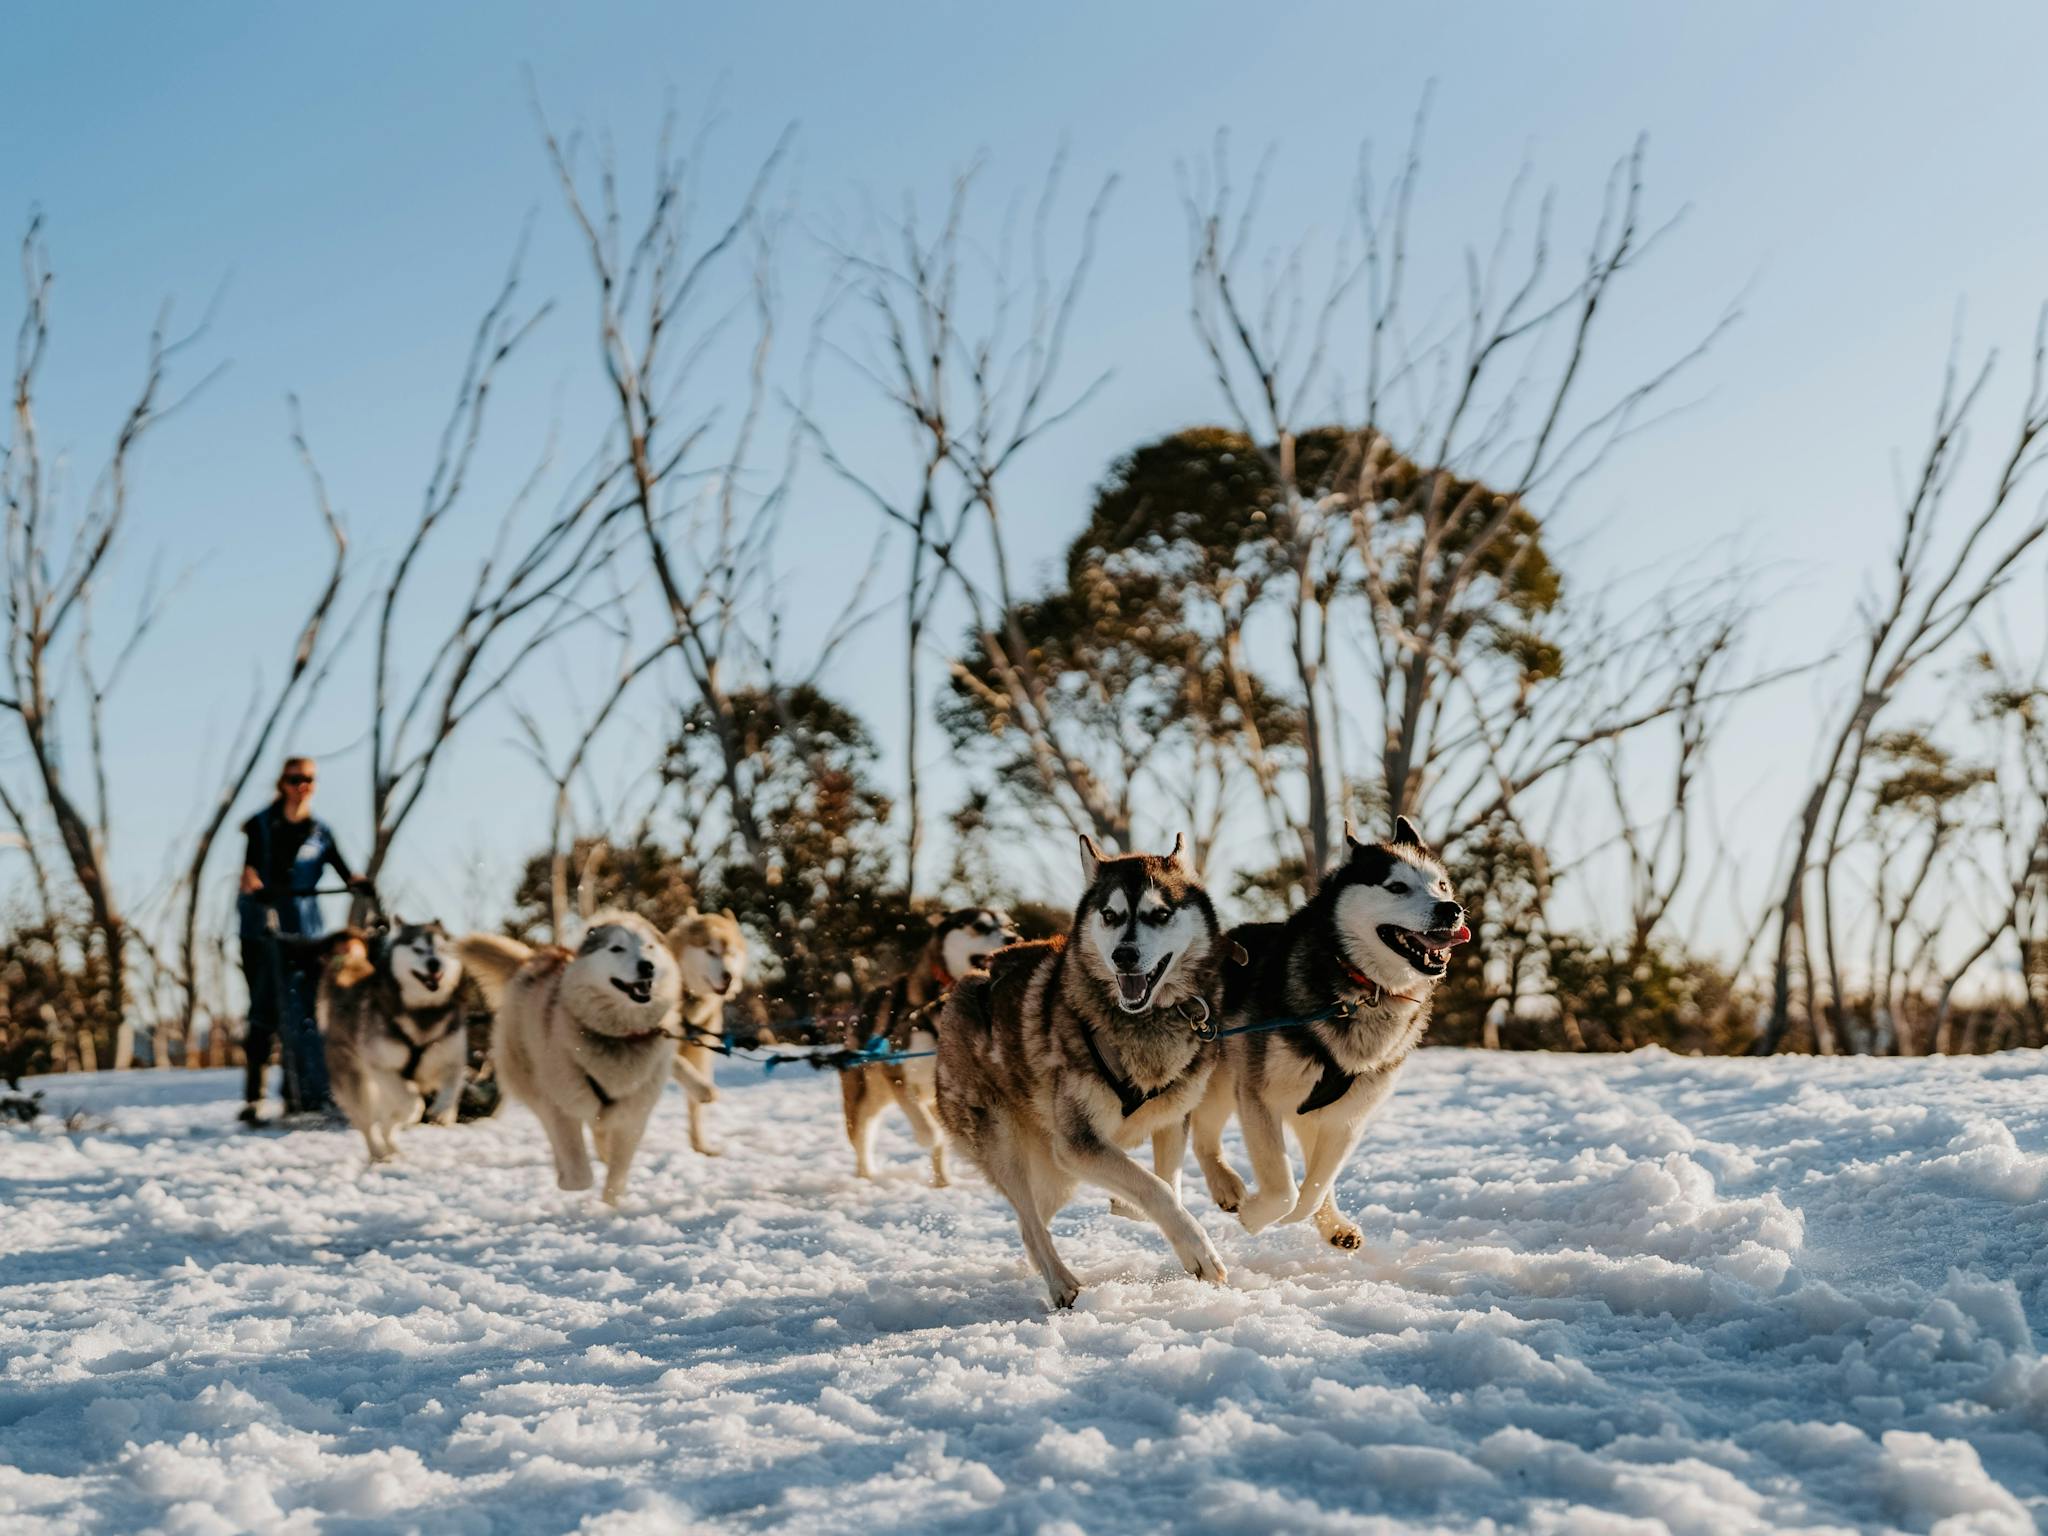 Husky sled dogs in action